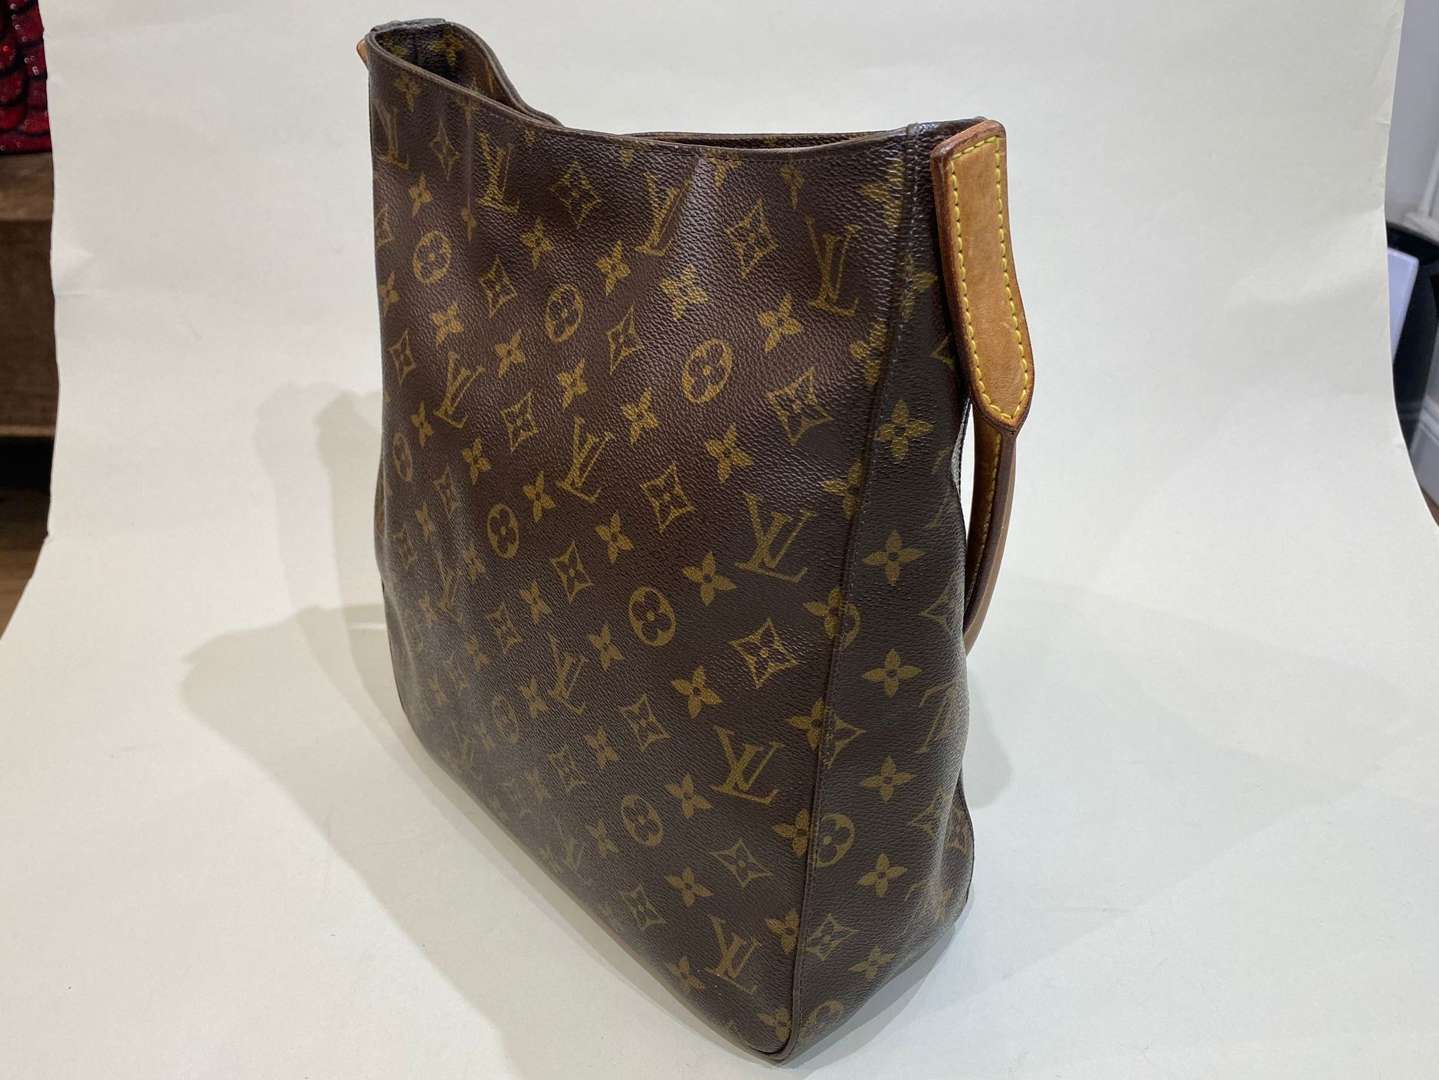 <p>LOUIS VUITTON, Looping, tan stitched leather and monogrammed shoulder bag</p>